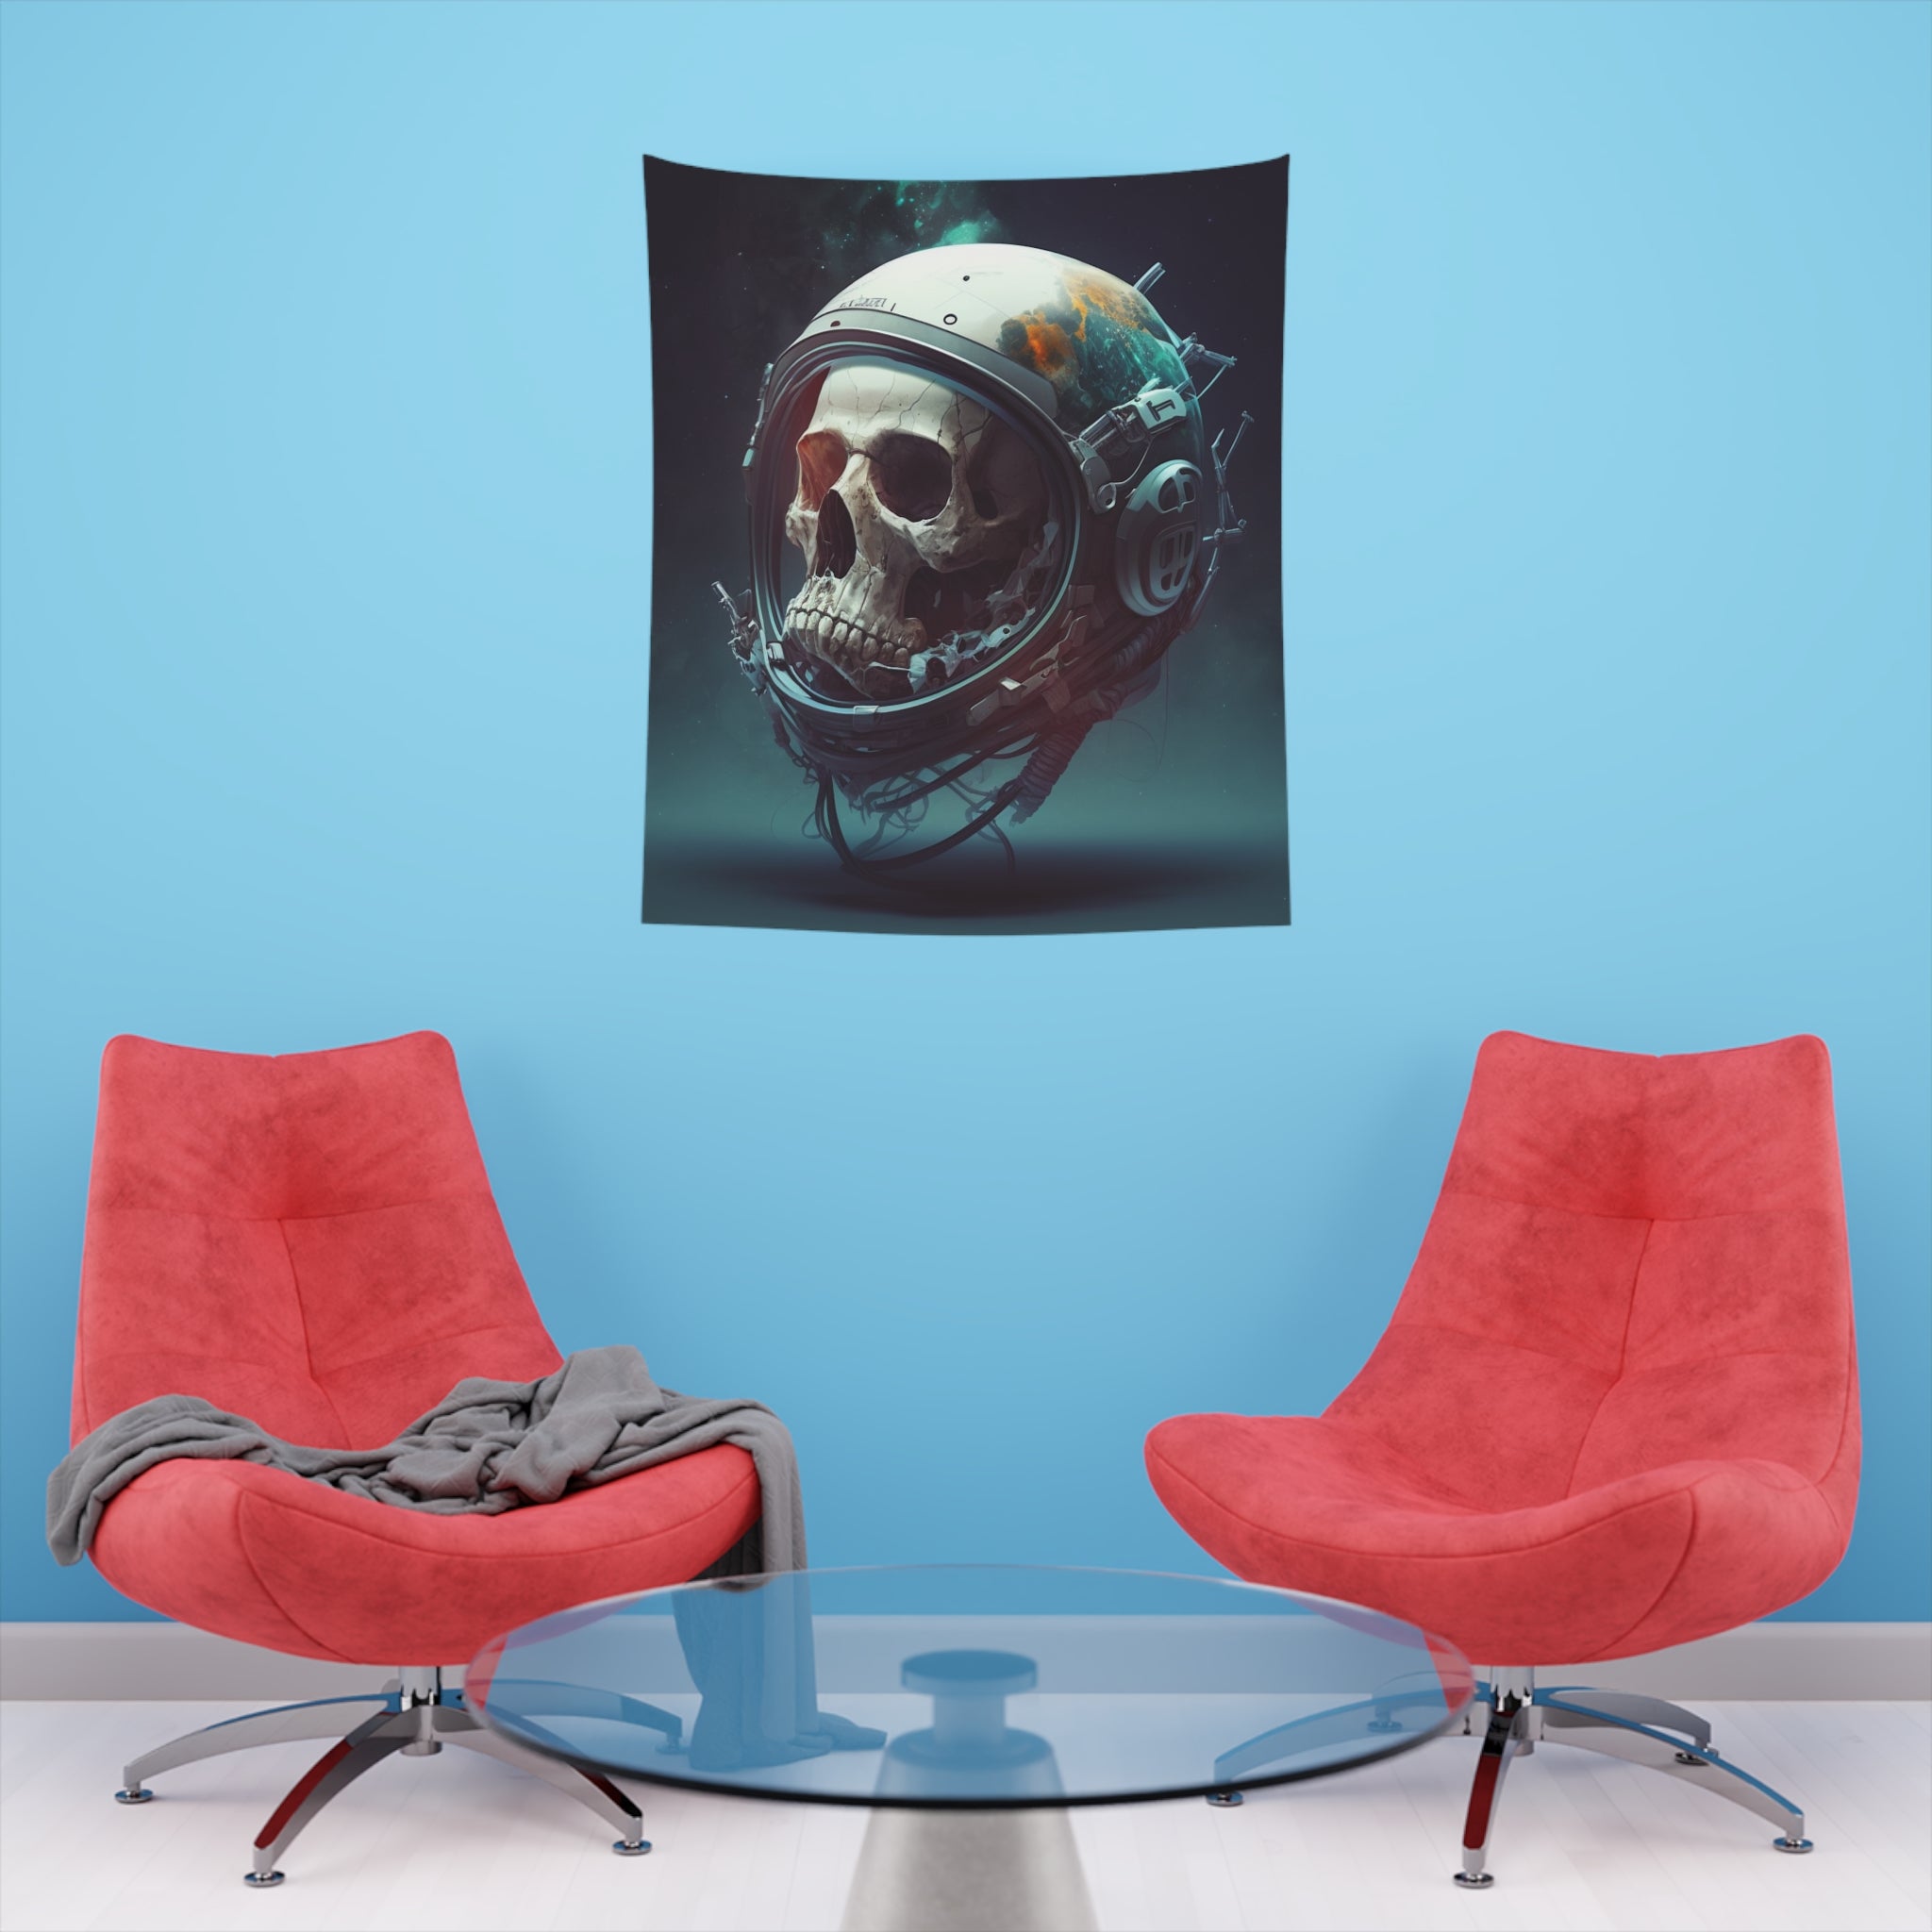 Undead Astronaut Space Man Skull Space Art Printed Wall Tapestry Sci Fi Psychedelic Tapestries